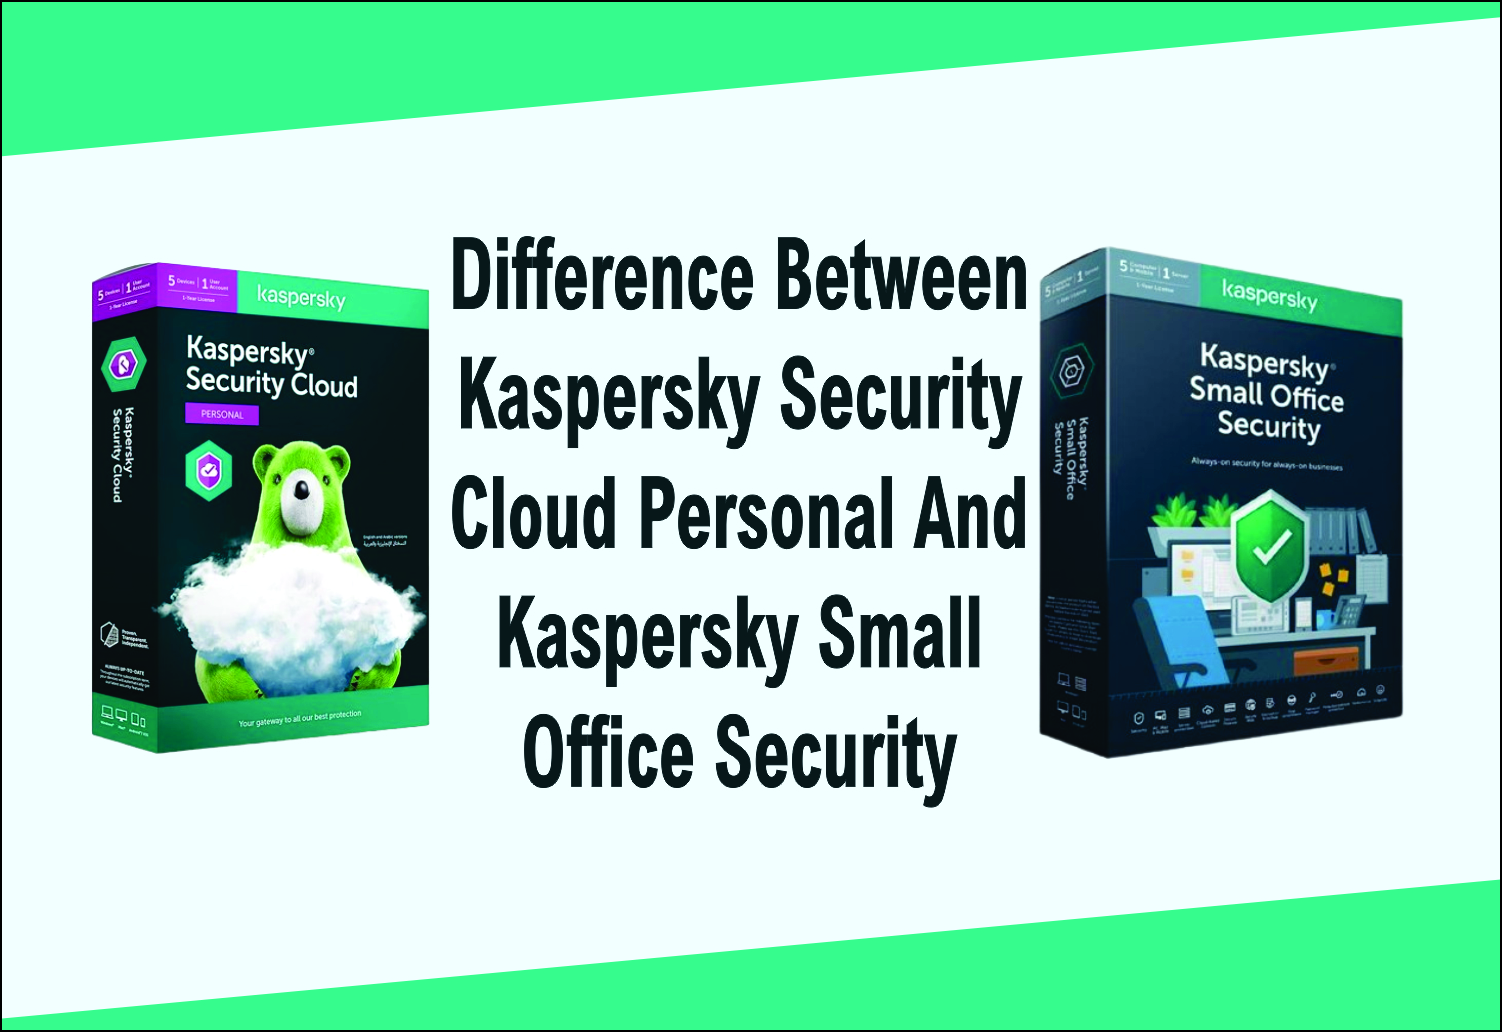 Difference Between Kaspersky Small Office Security and Kaspersky Security Cloud Personal